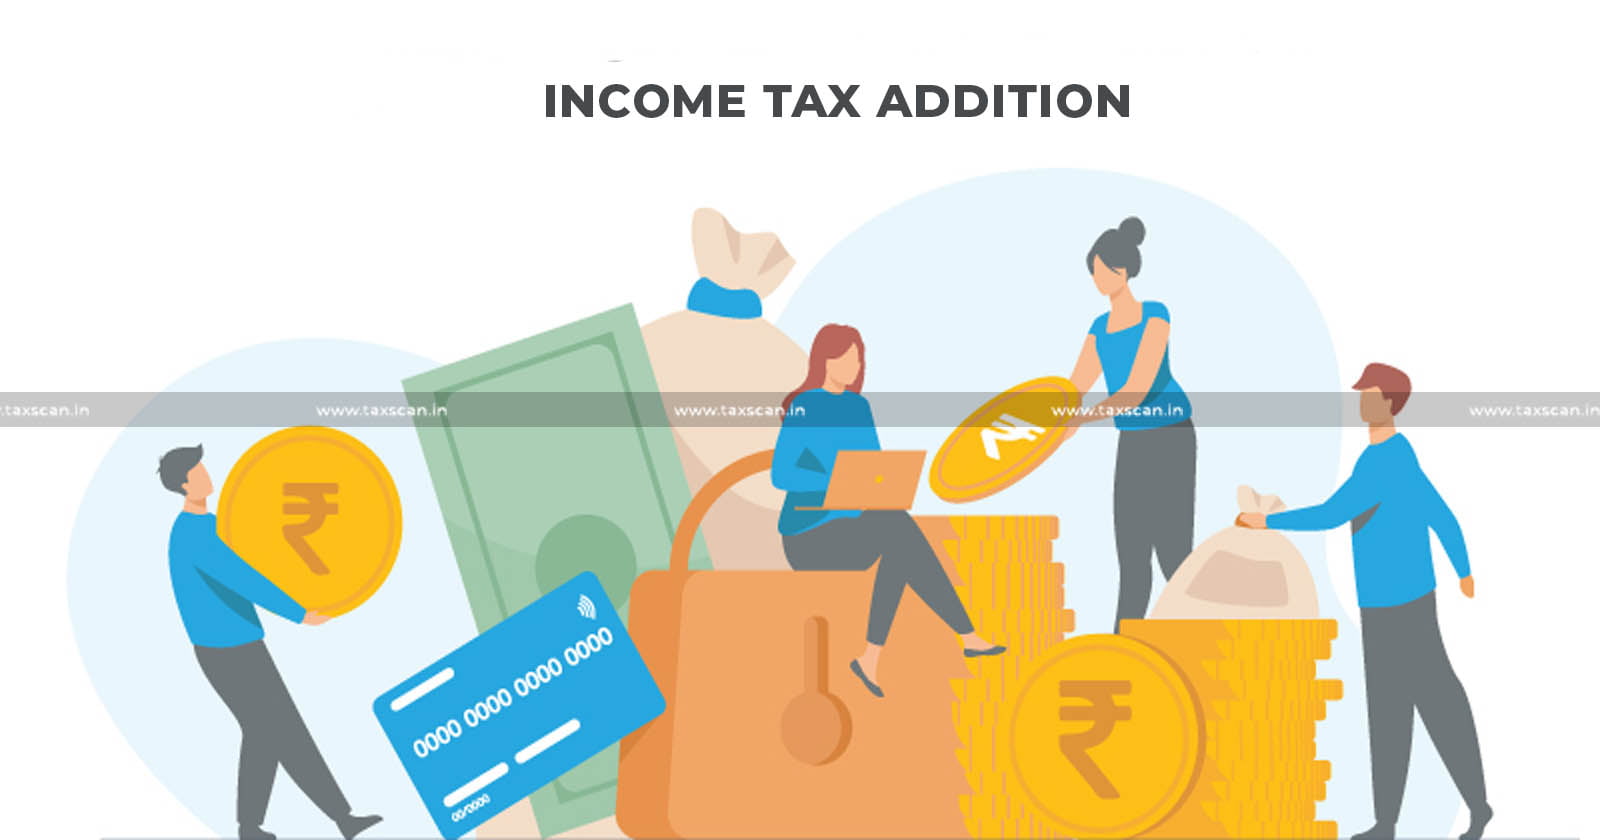 Claim - of - Expenditure - Bills - ITAT - Income - Tax - Addition - TAXSCAN